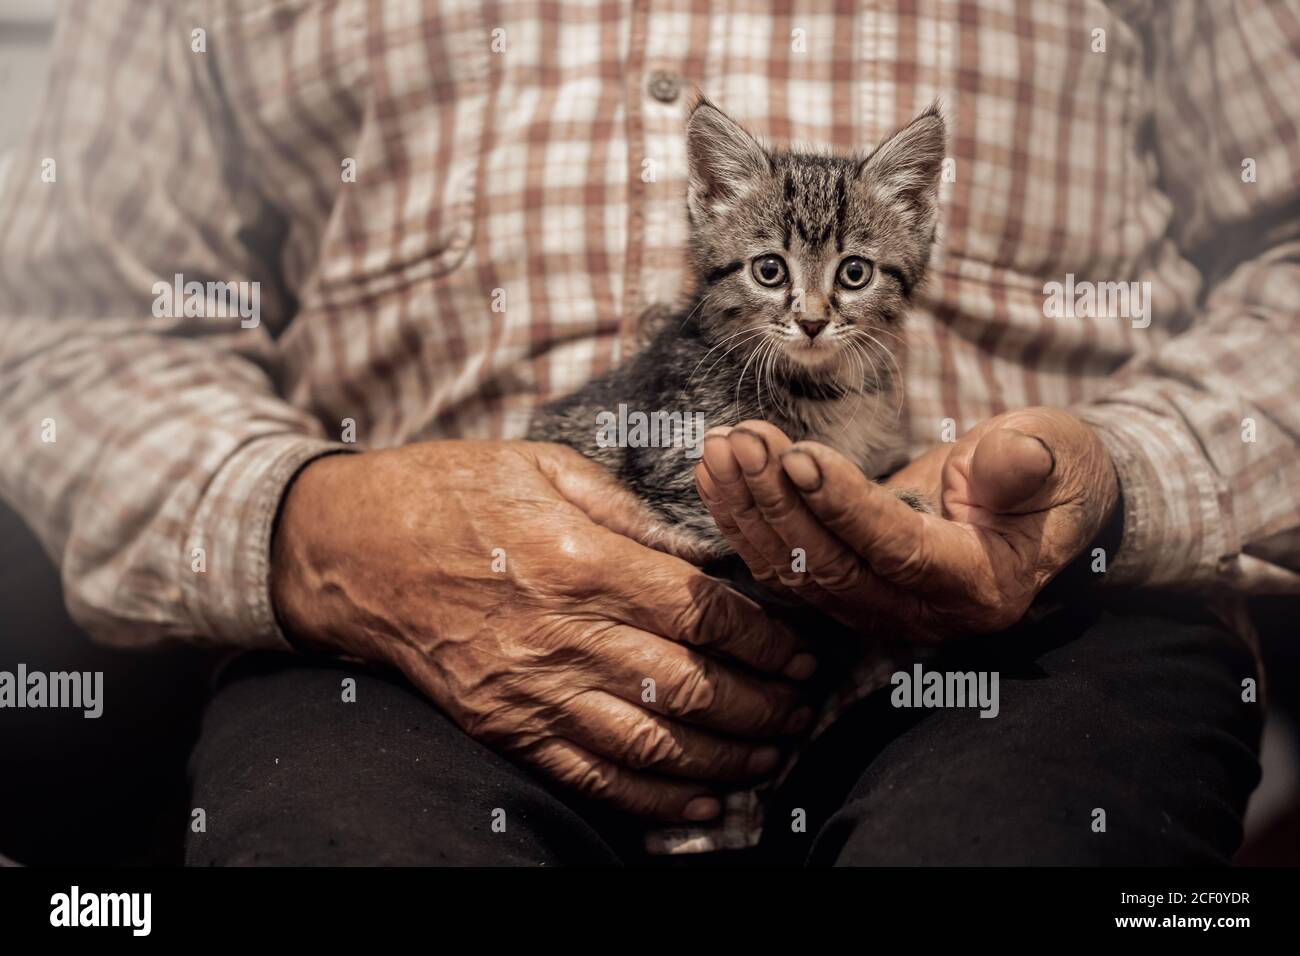 Senior man holds in hand small kitten. Concept support friendship animals cat and people love Stock Photo